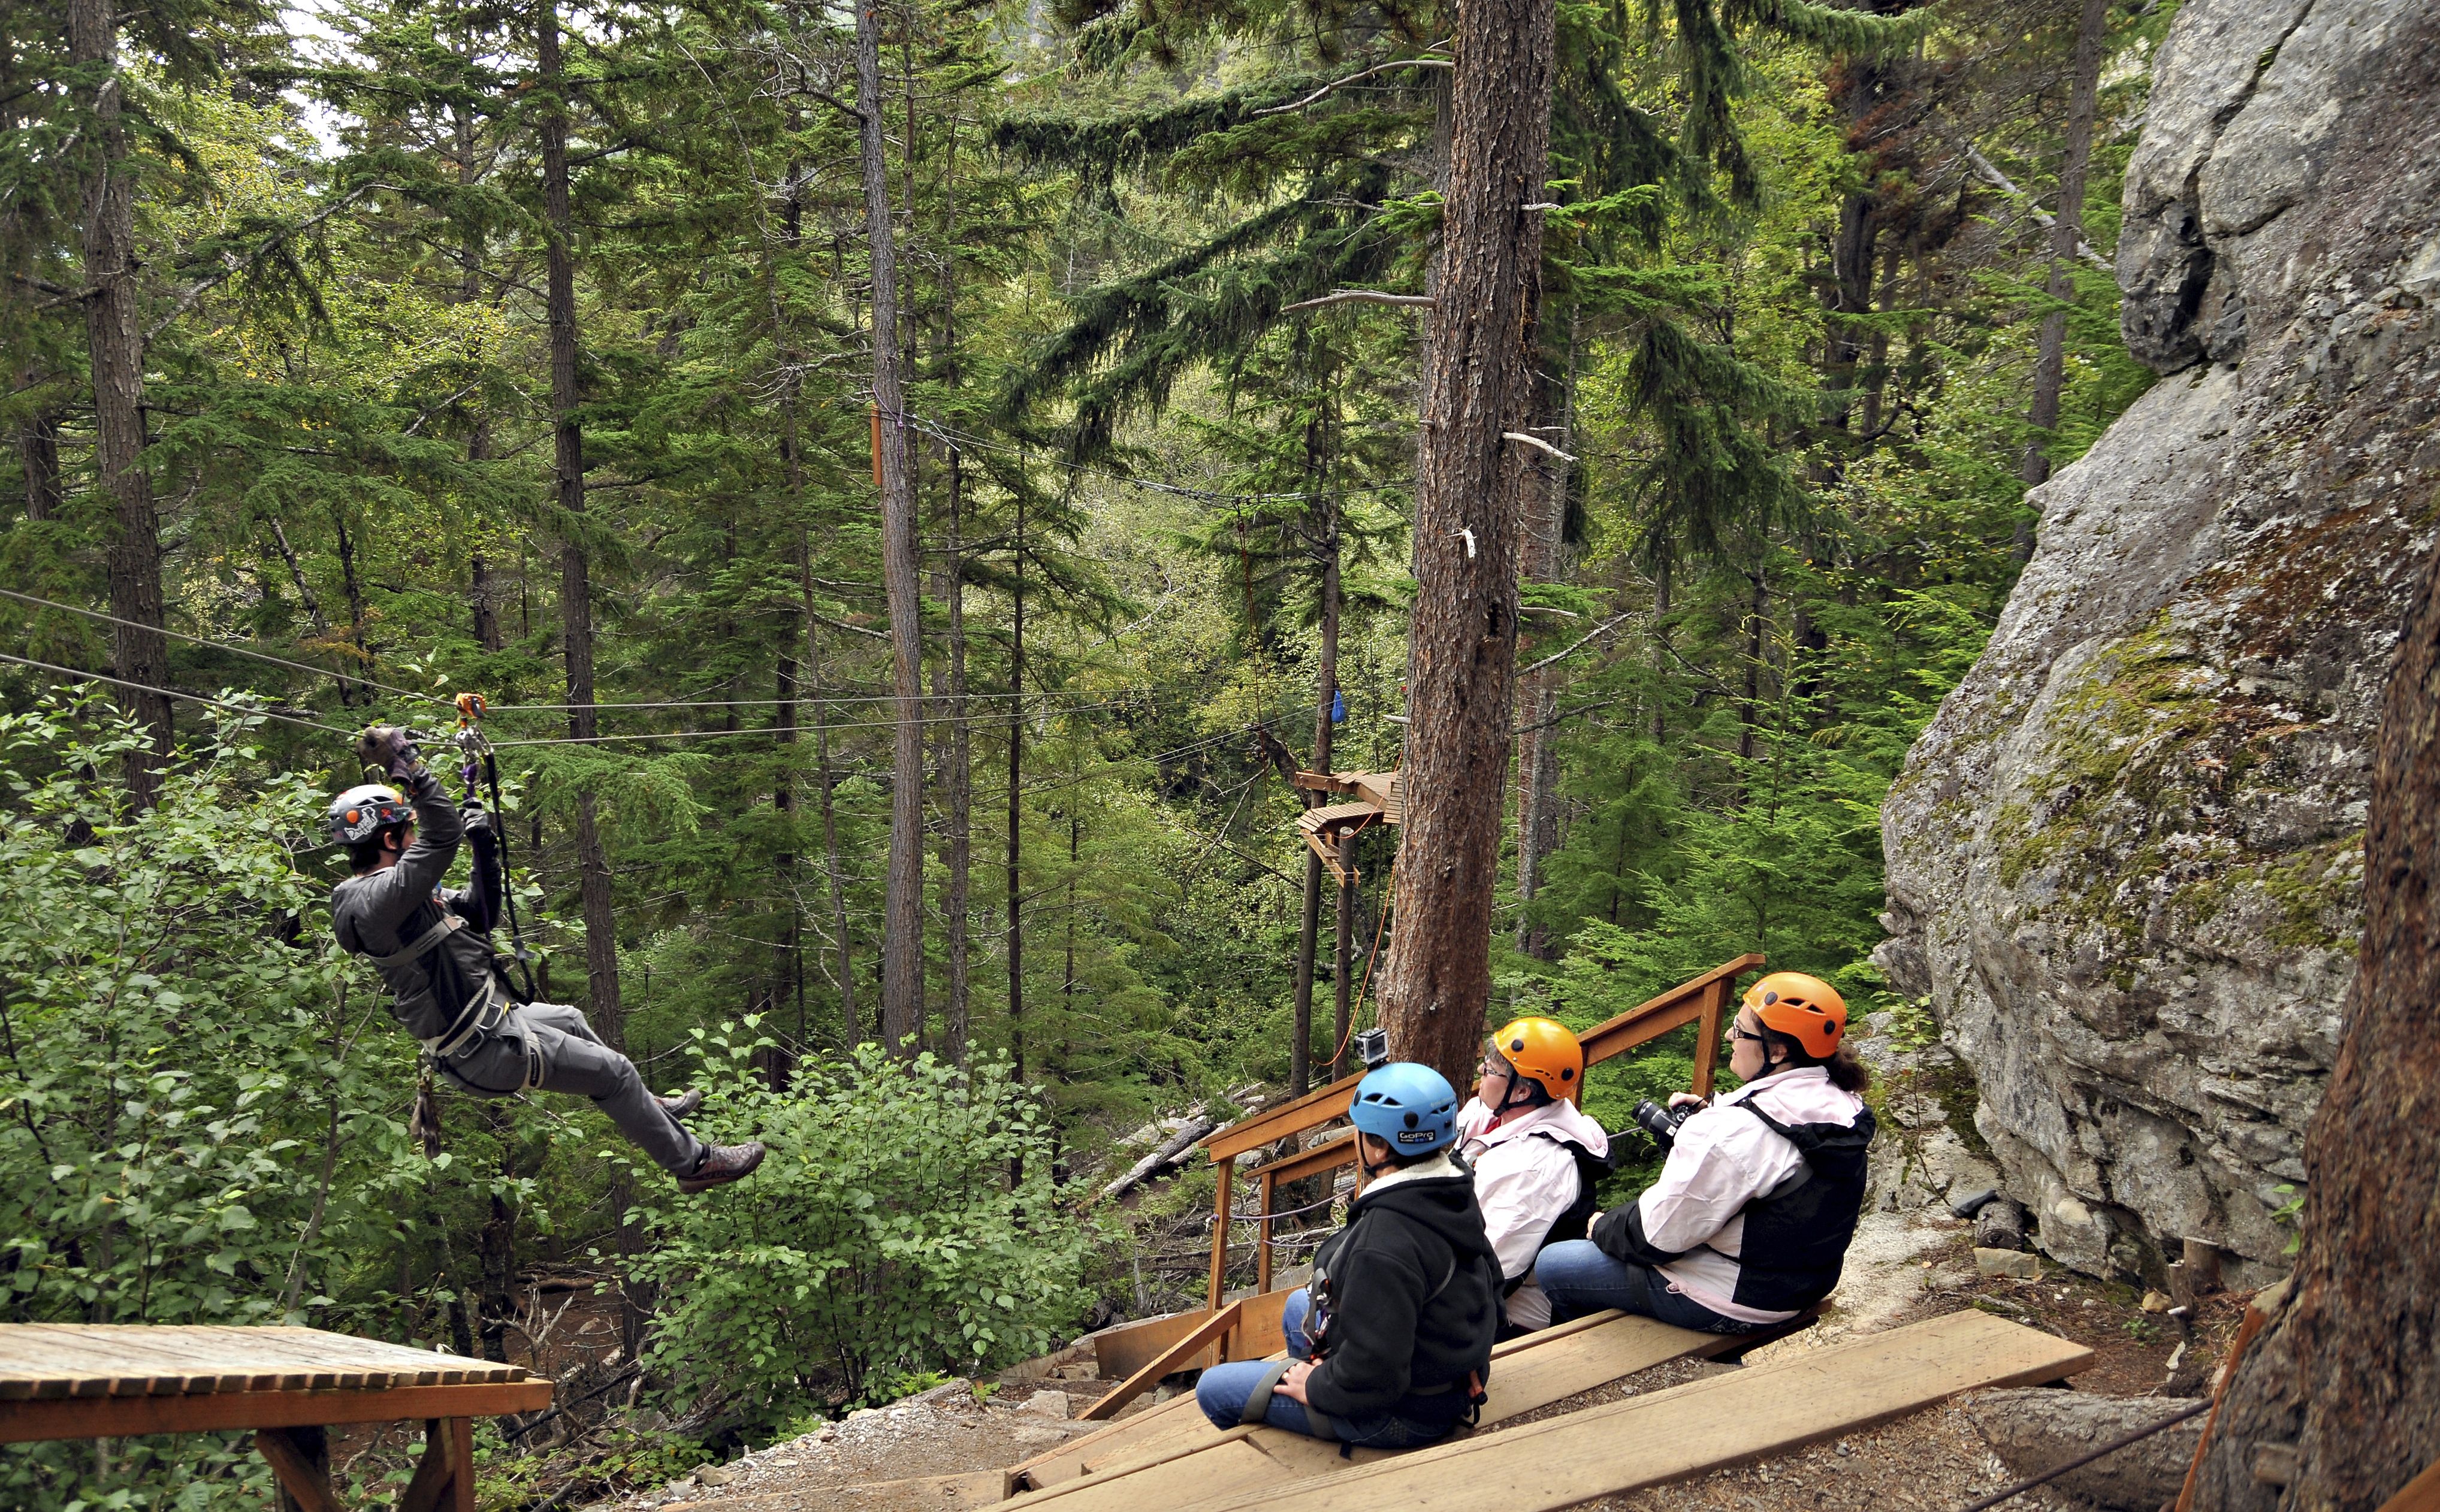 Ziplining in Alaska with lush green forest background, three onlookers in helmets. 